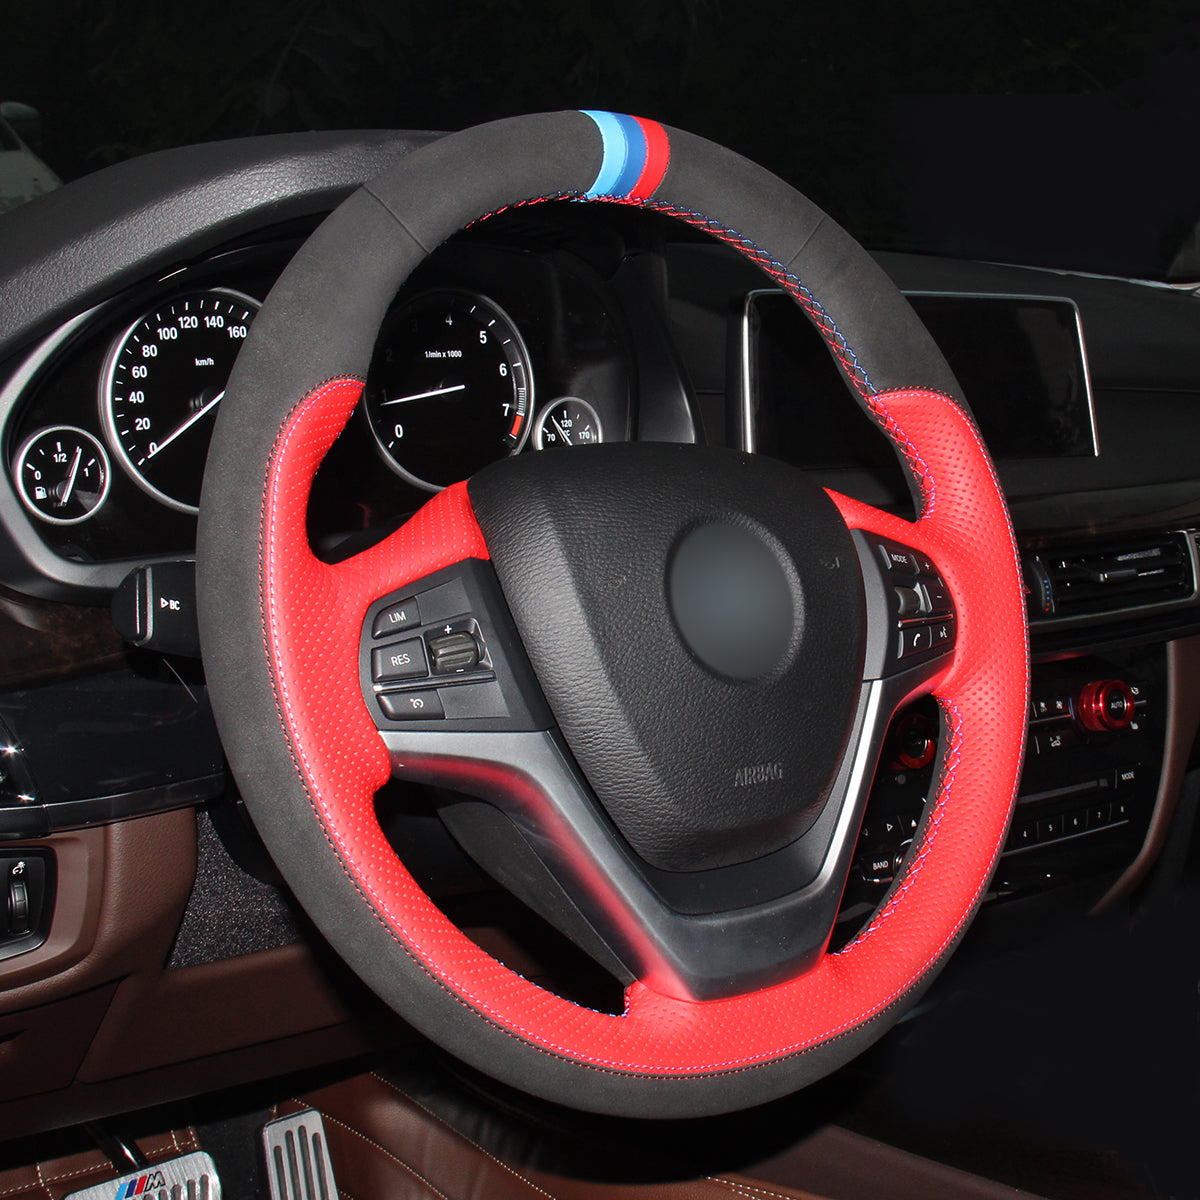 MEWANT Hand Stitch Black Leather Suede Car Steering Wheel Cover for BMW X5 F15 2013-2018 / X6 F16 2014-2019